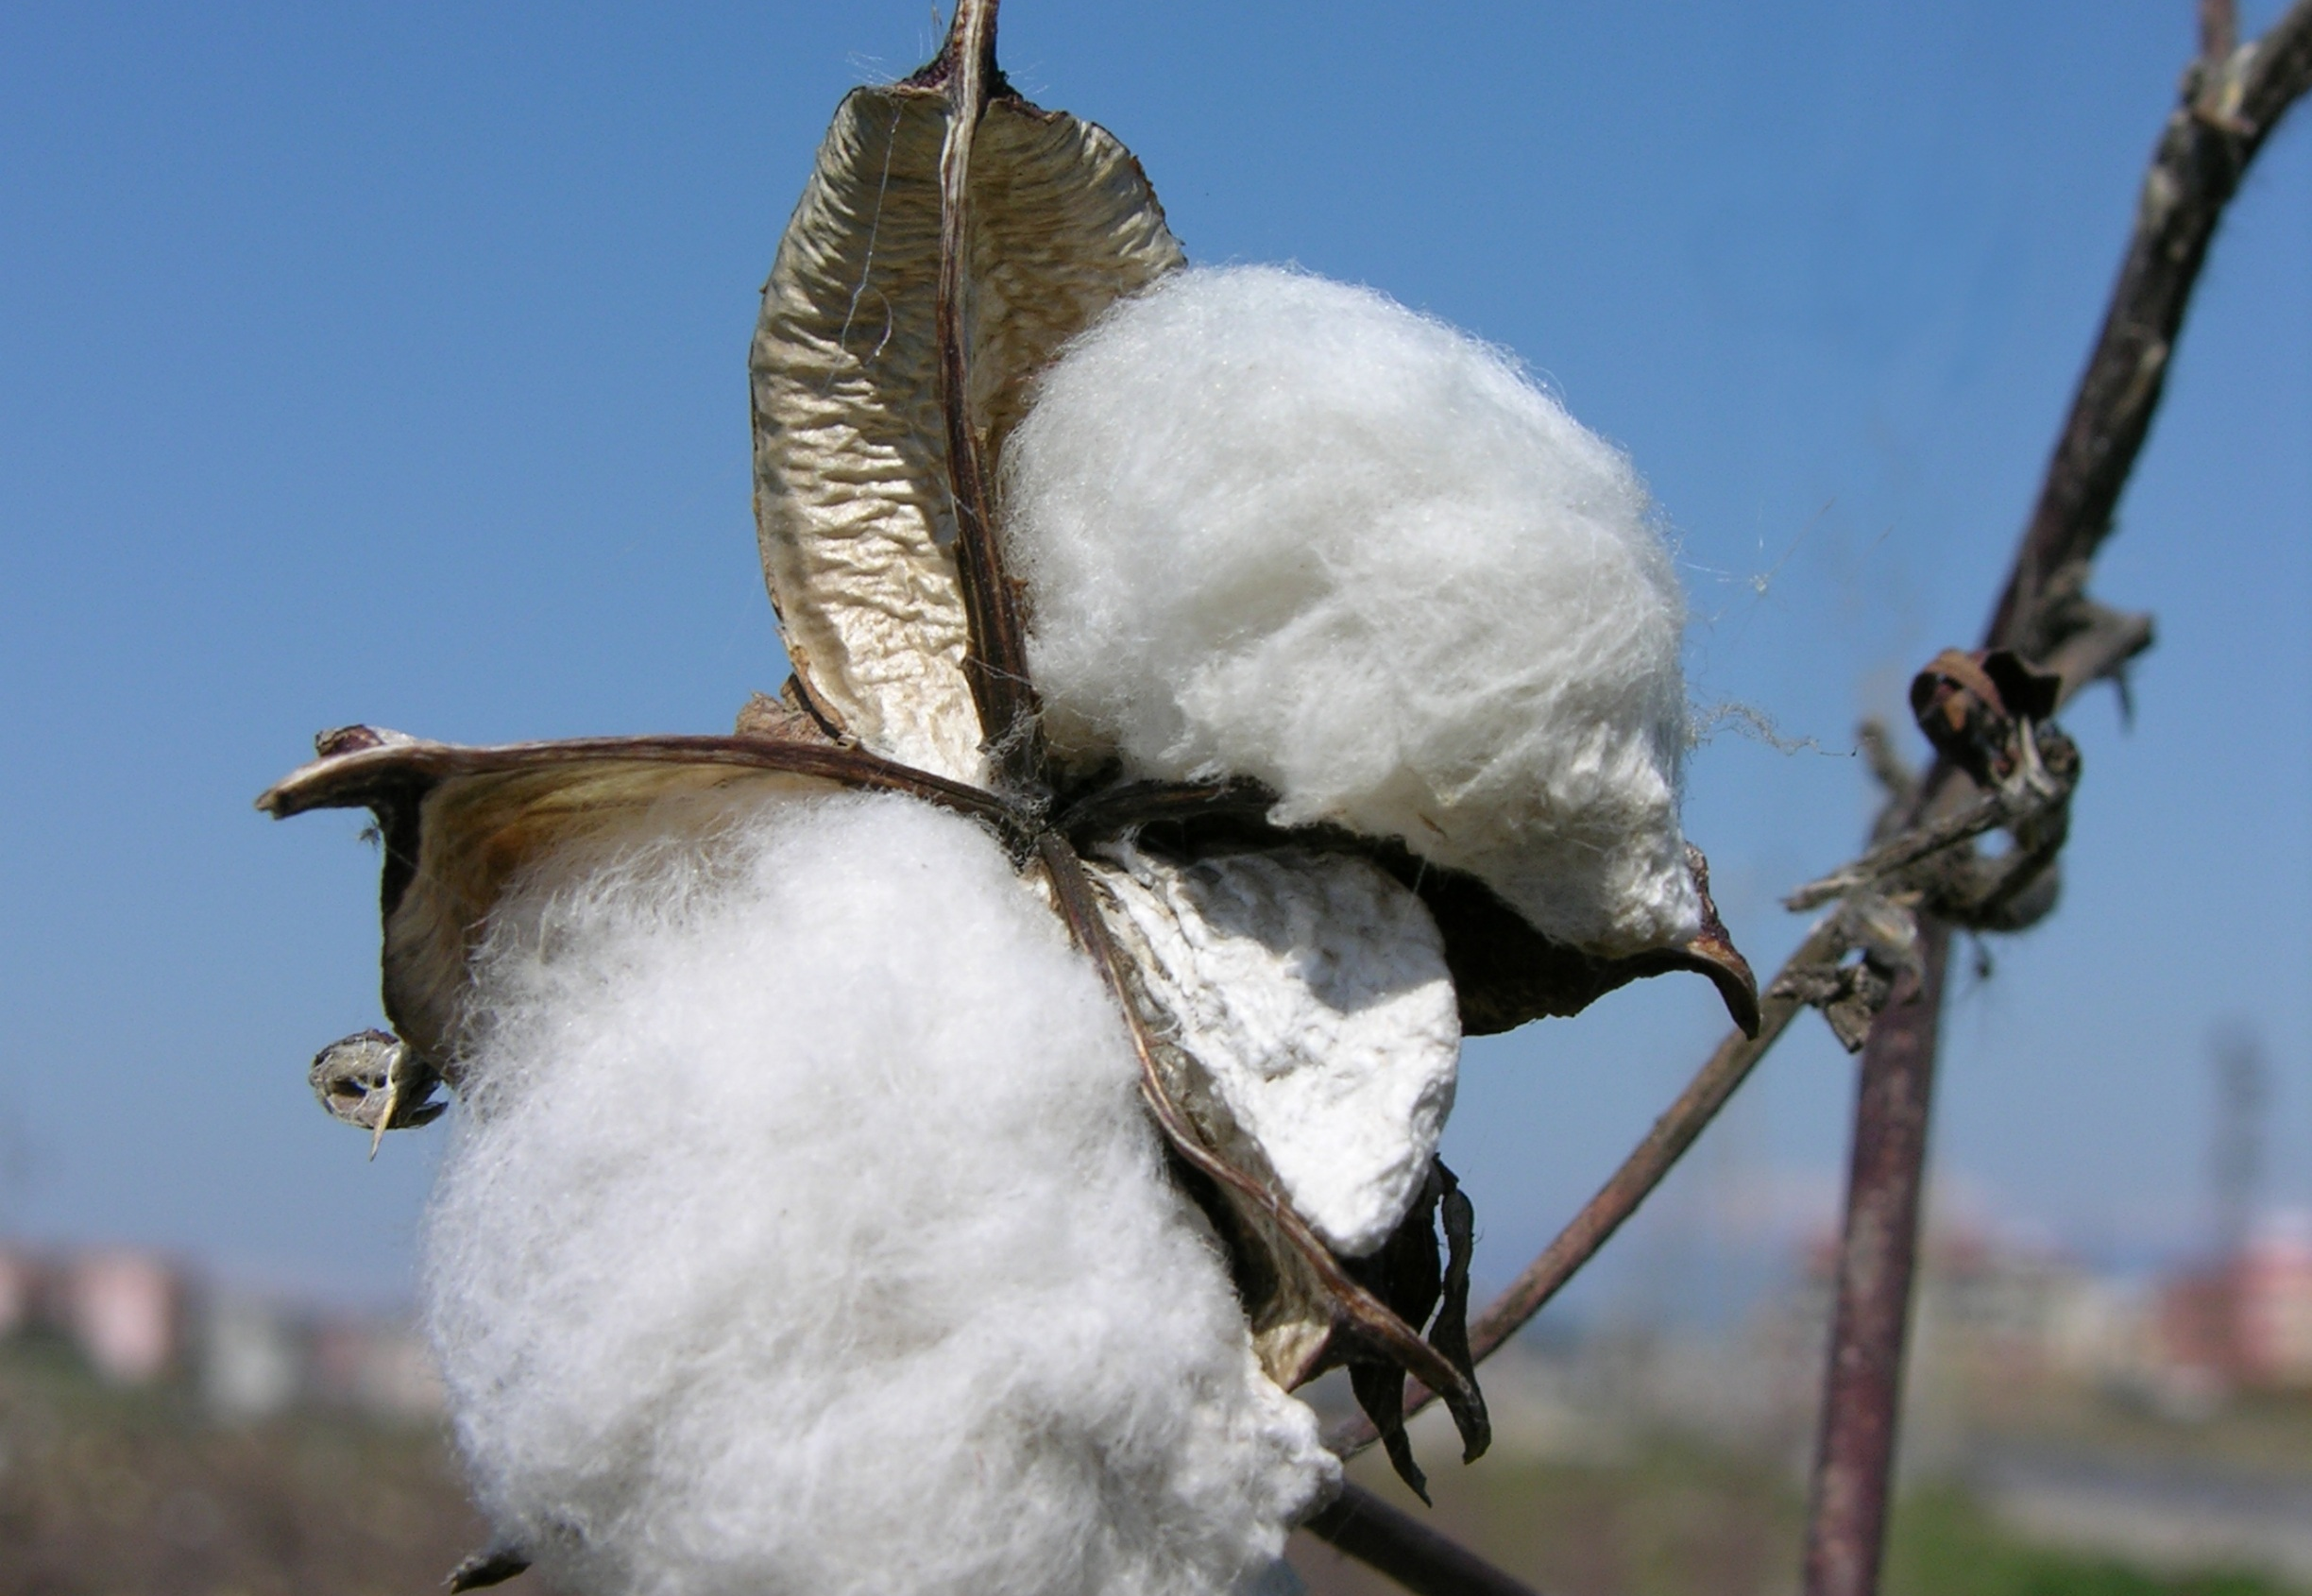 Sustainability in Textile Supply Chains